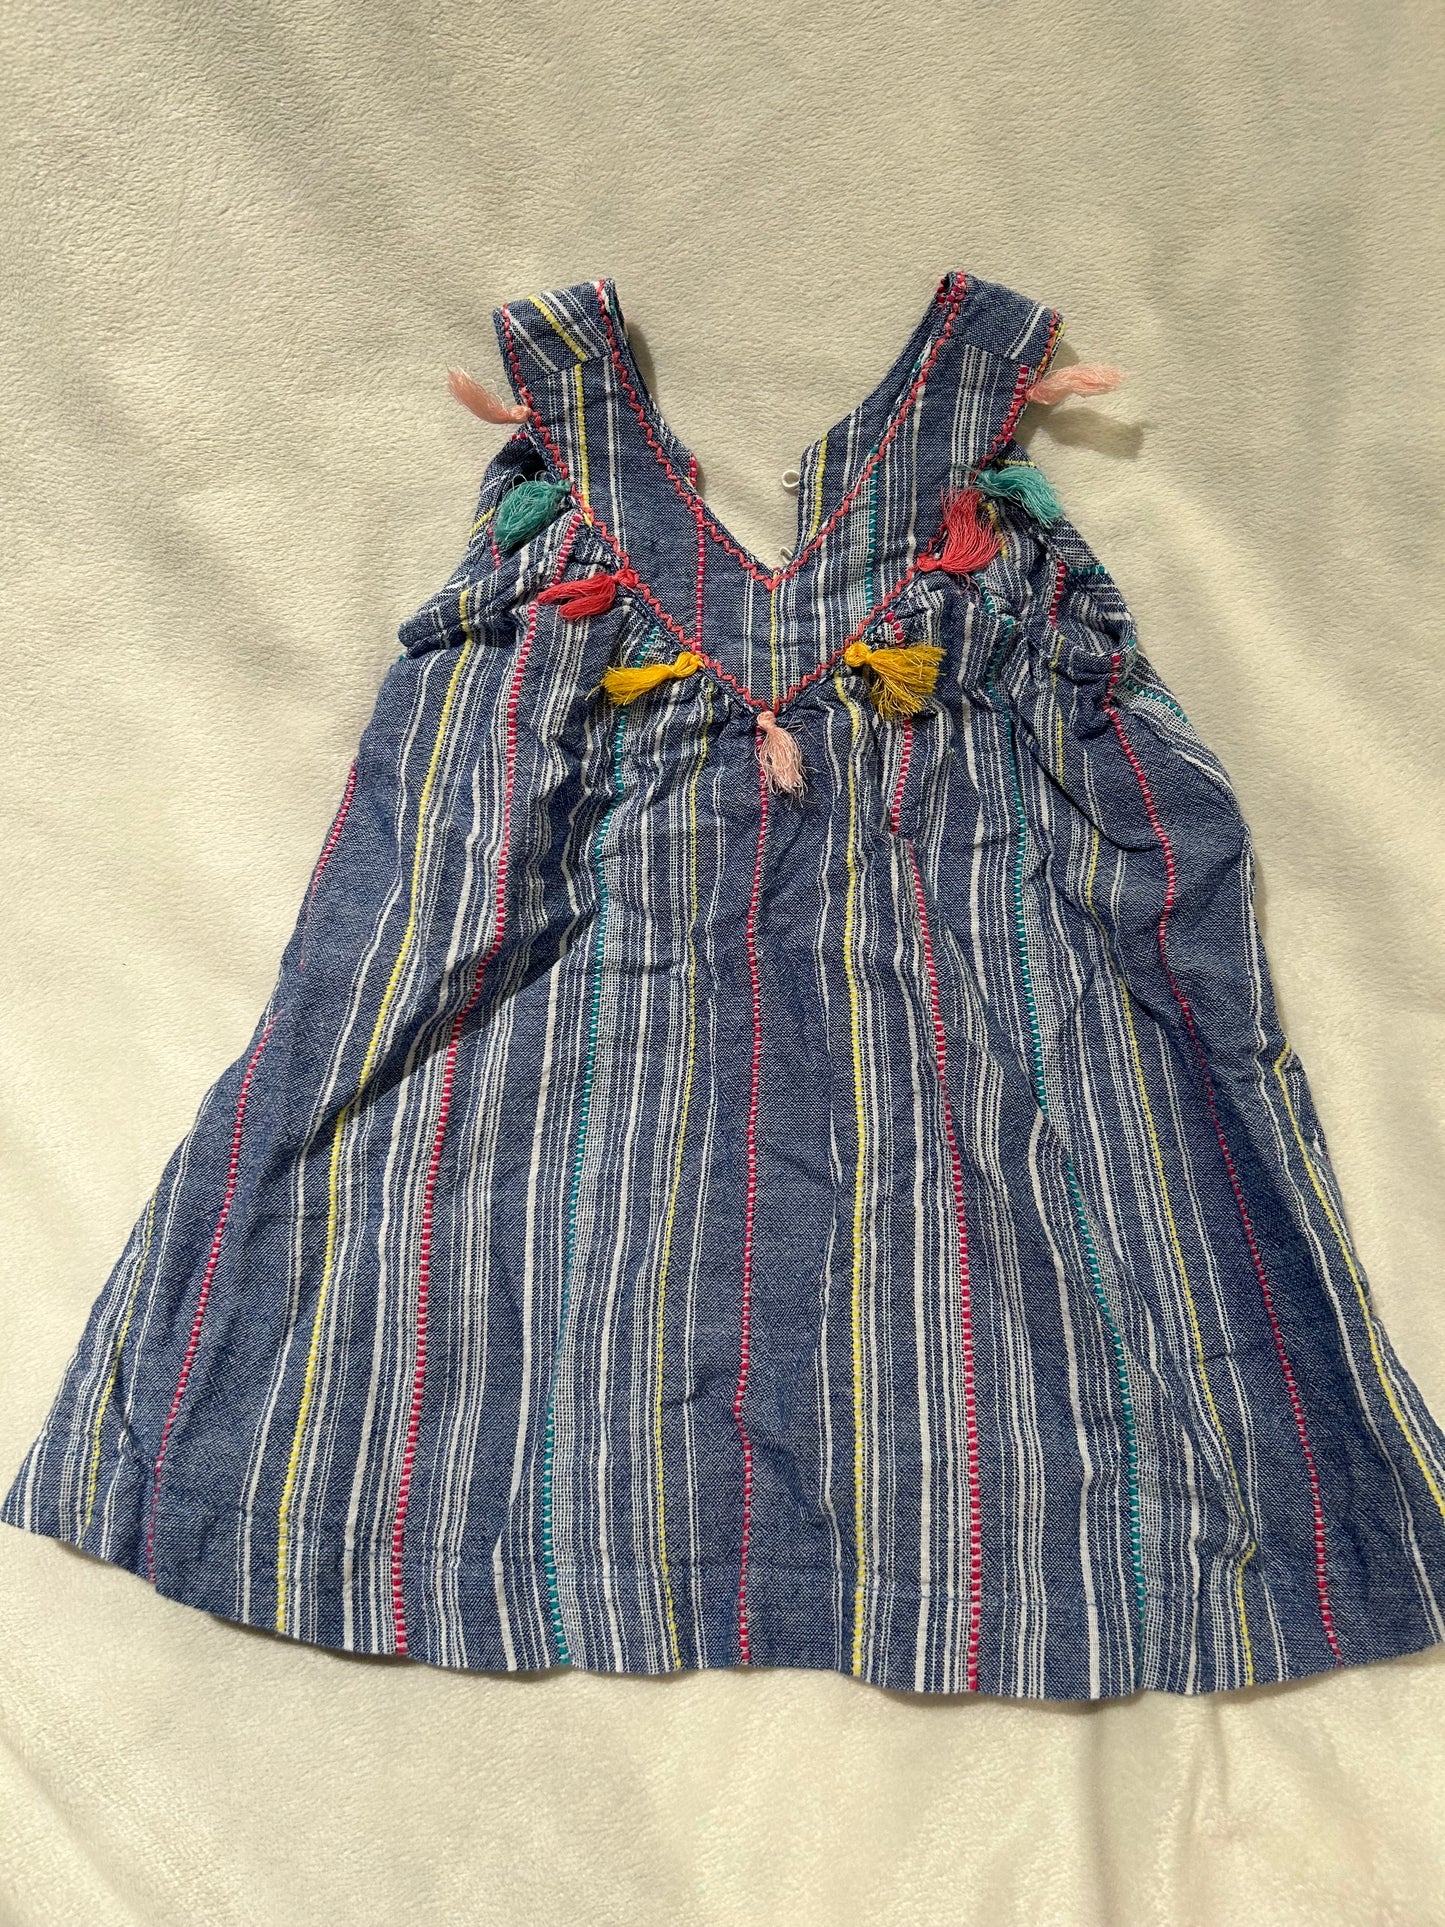 Mud pie 12-18 month girl Chambray dress with stripes